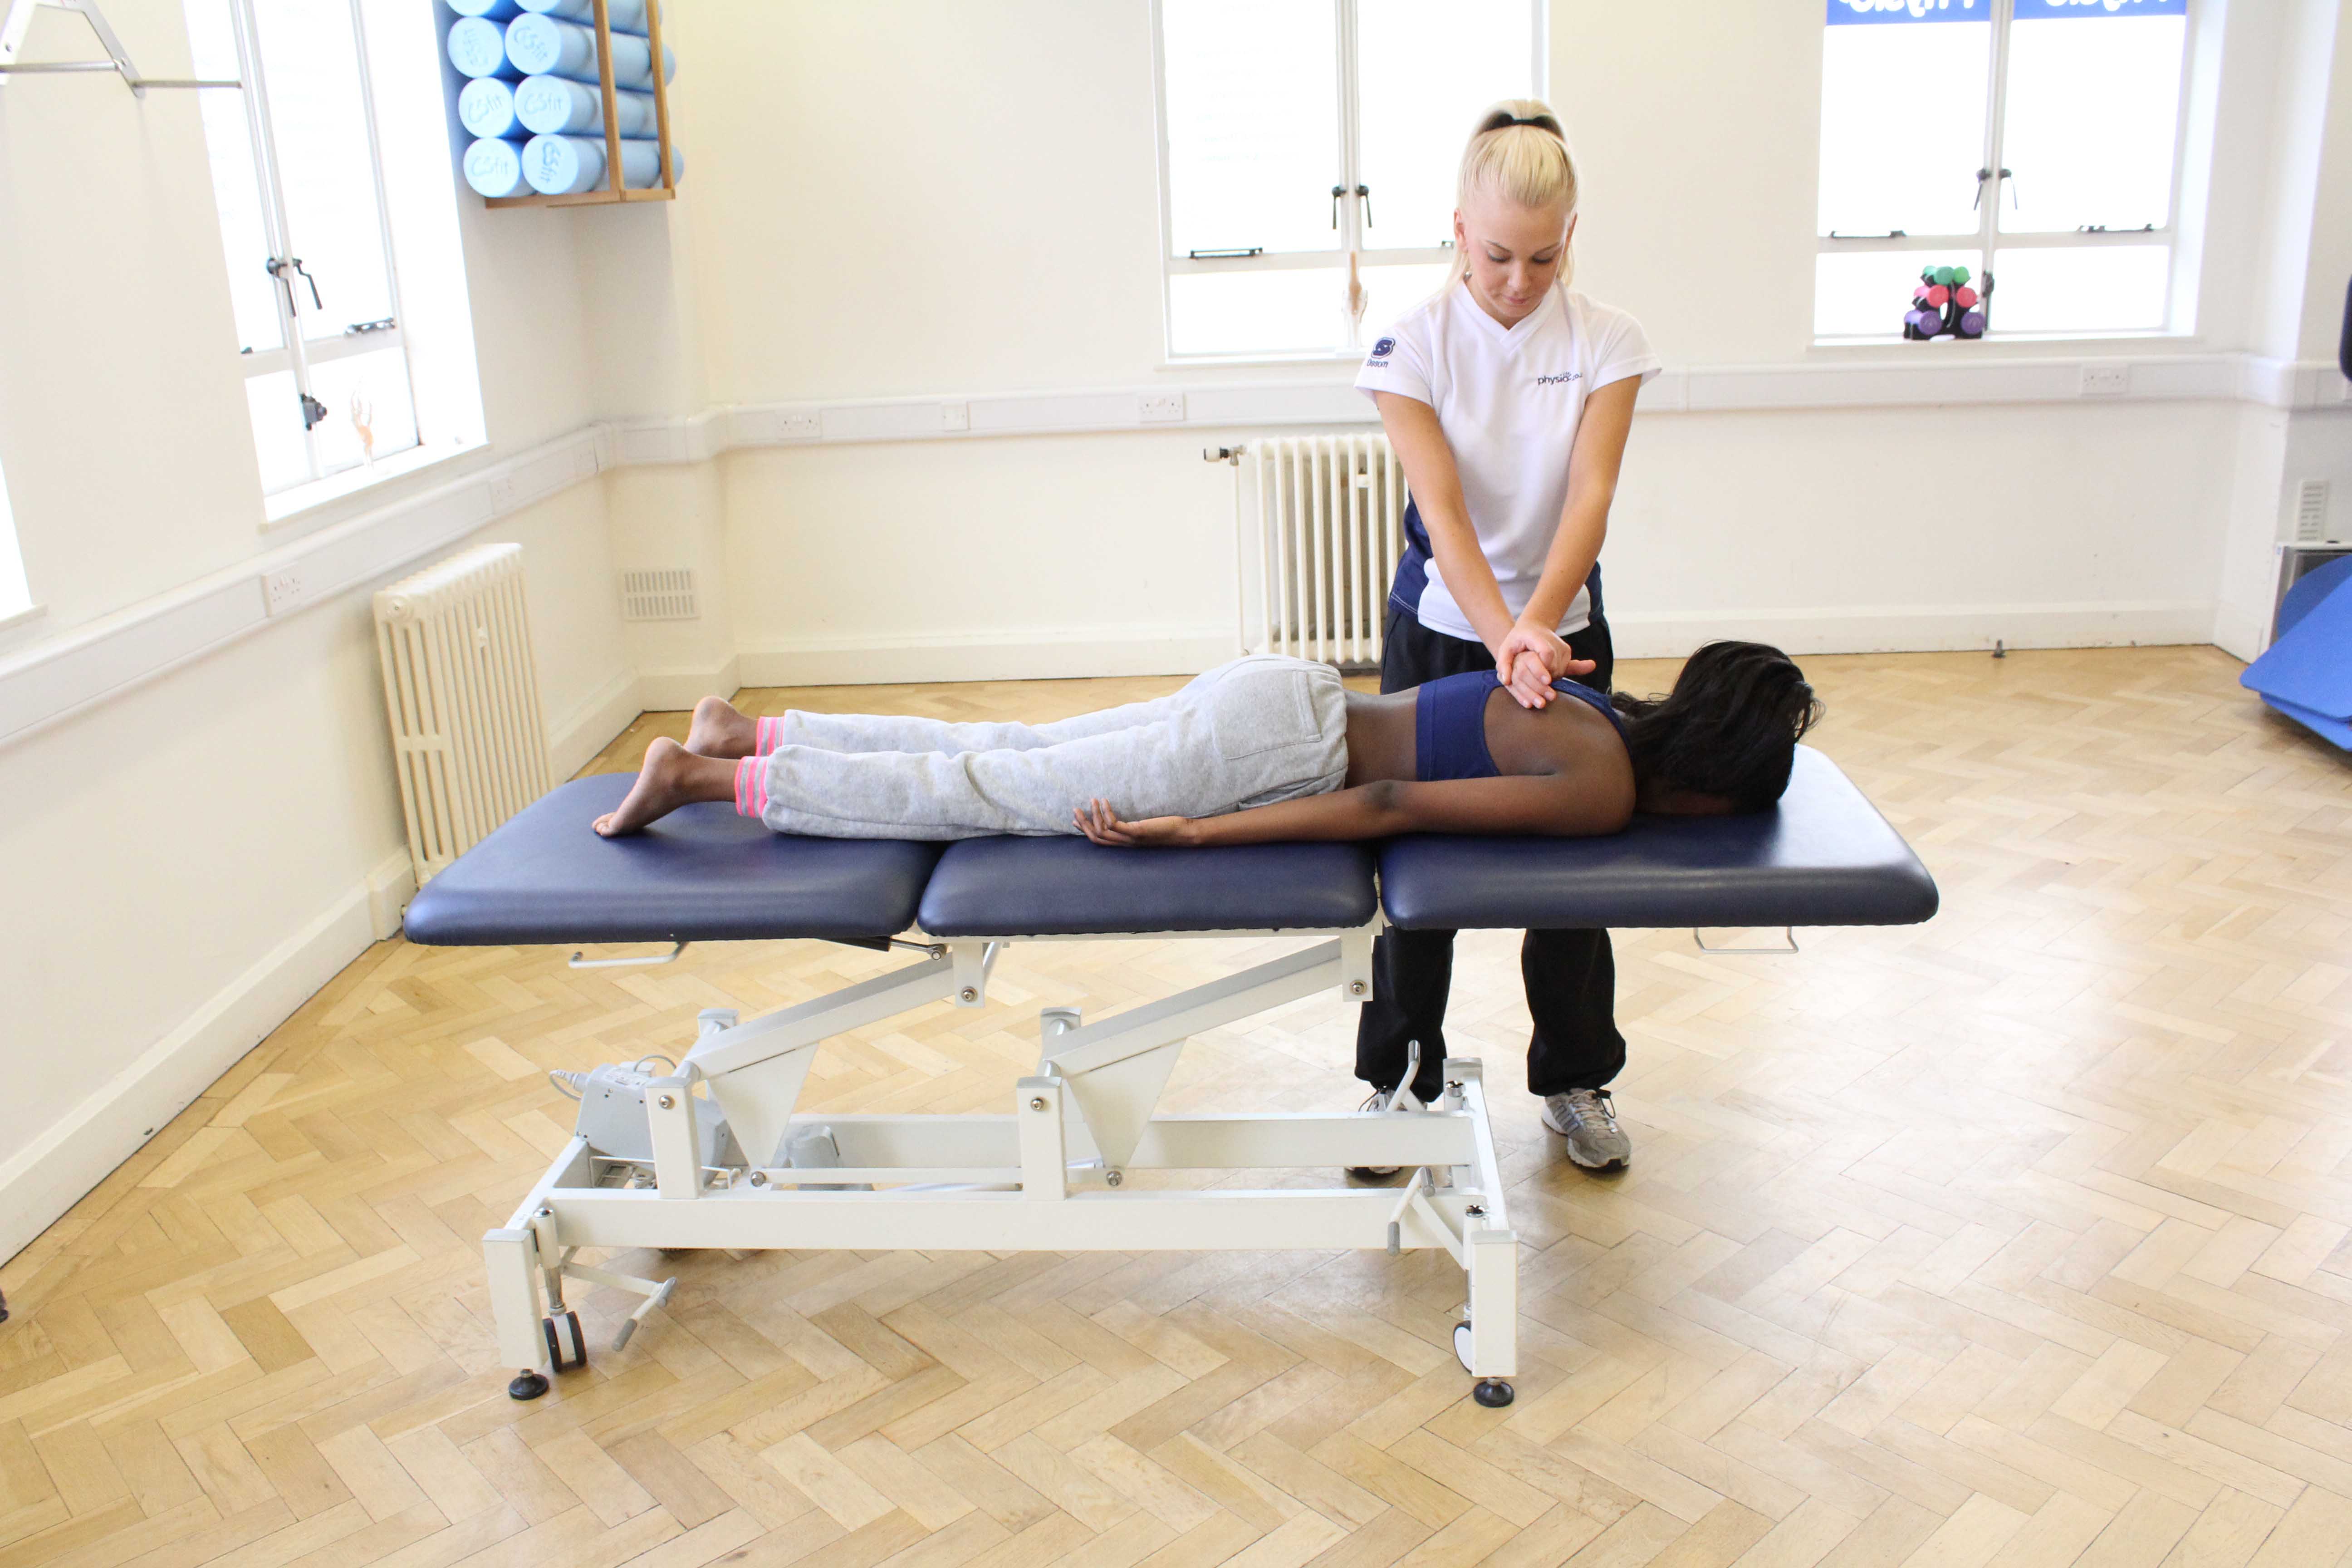 Our physiotherapists can provide a variety of manual therapy techniqes including mobalisations to areas causing discomfort.